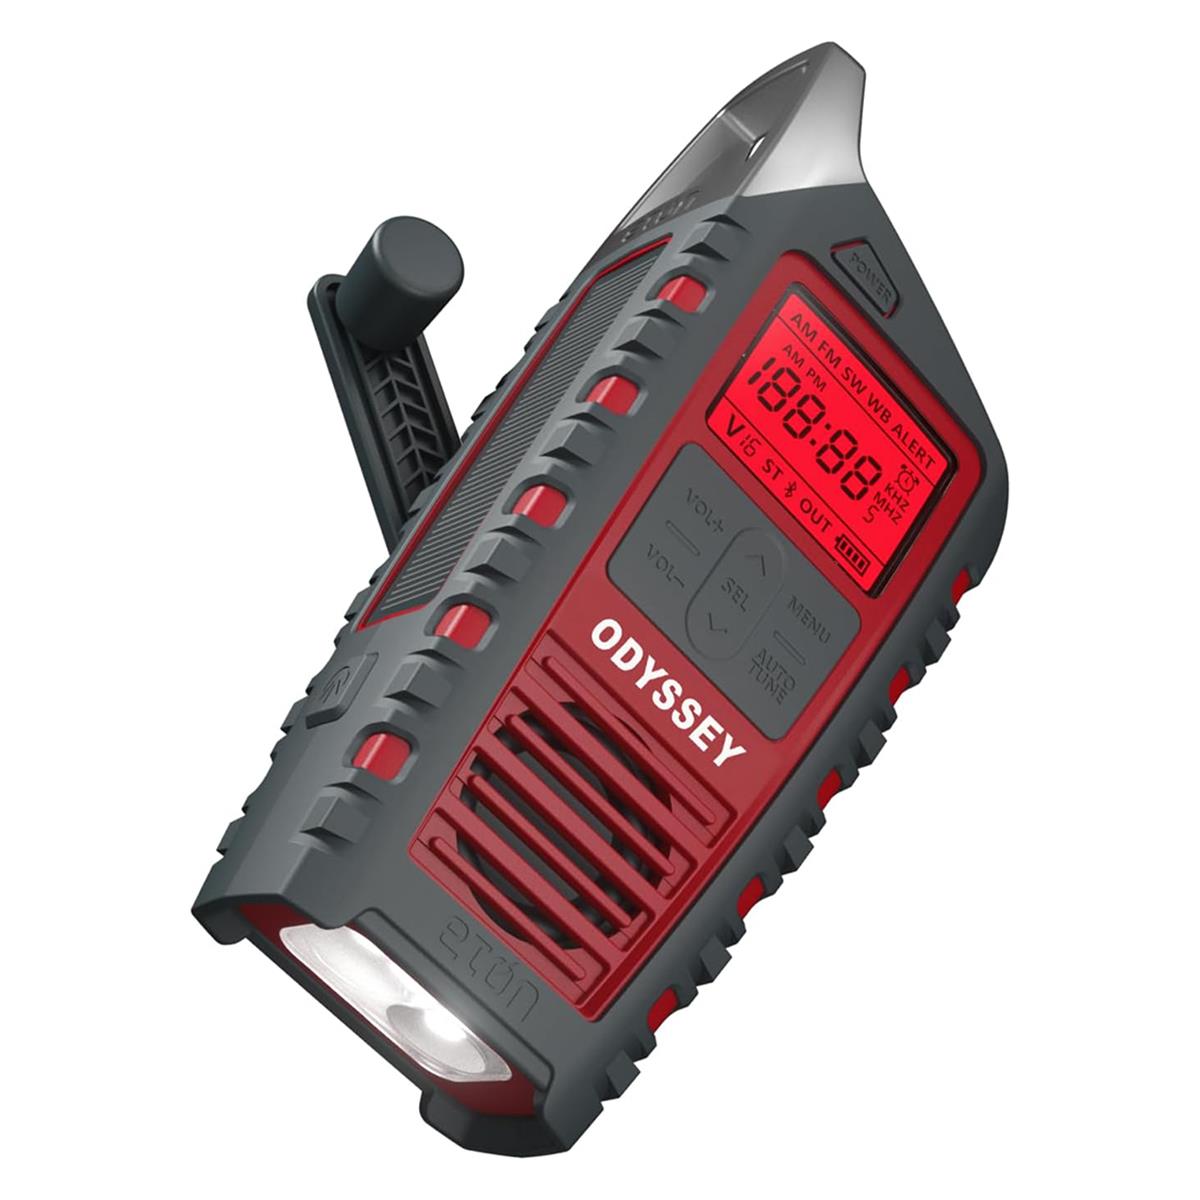 Image of Eton Odyssey Multi-Powered All-Band Bluetooth Emergency Radio with RDS